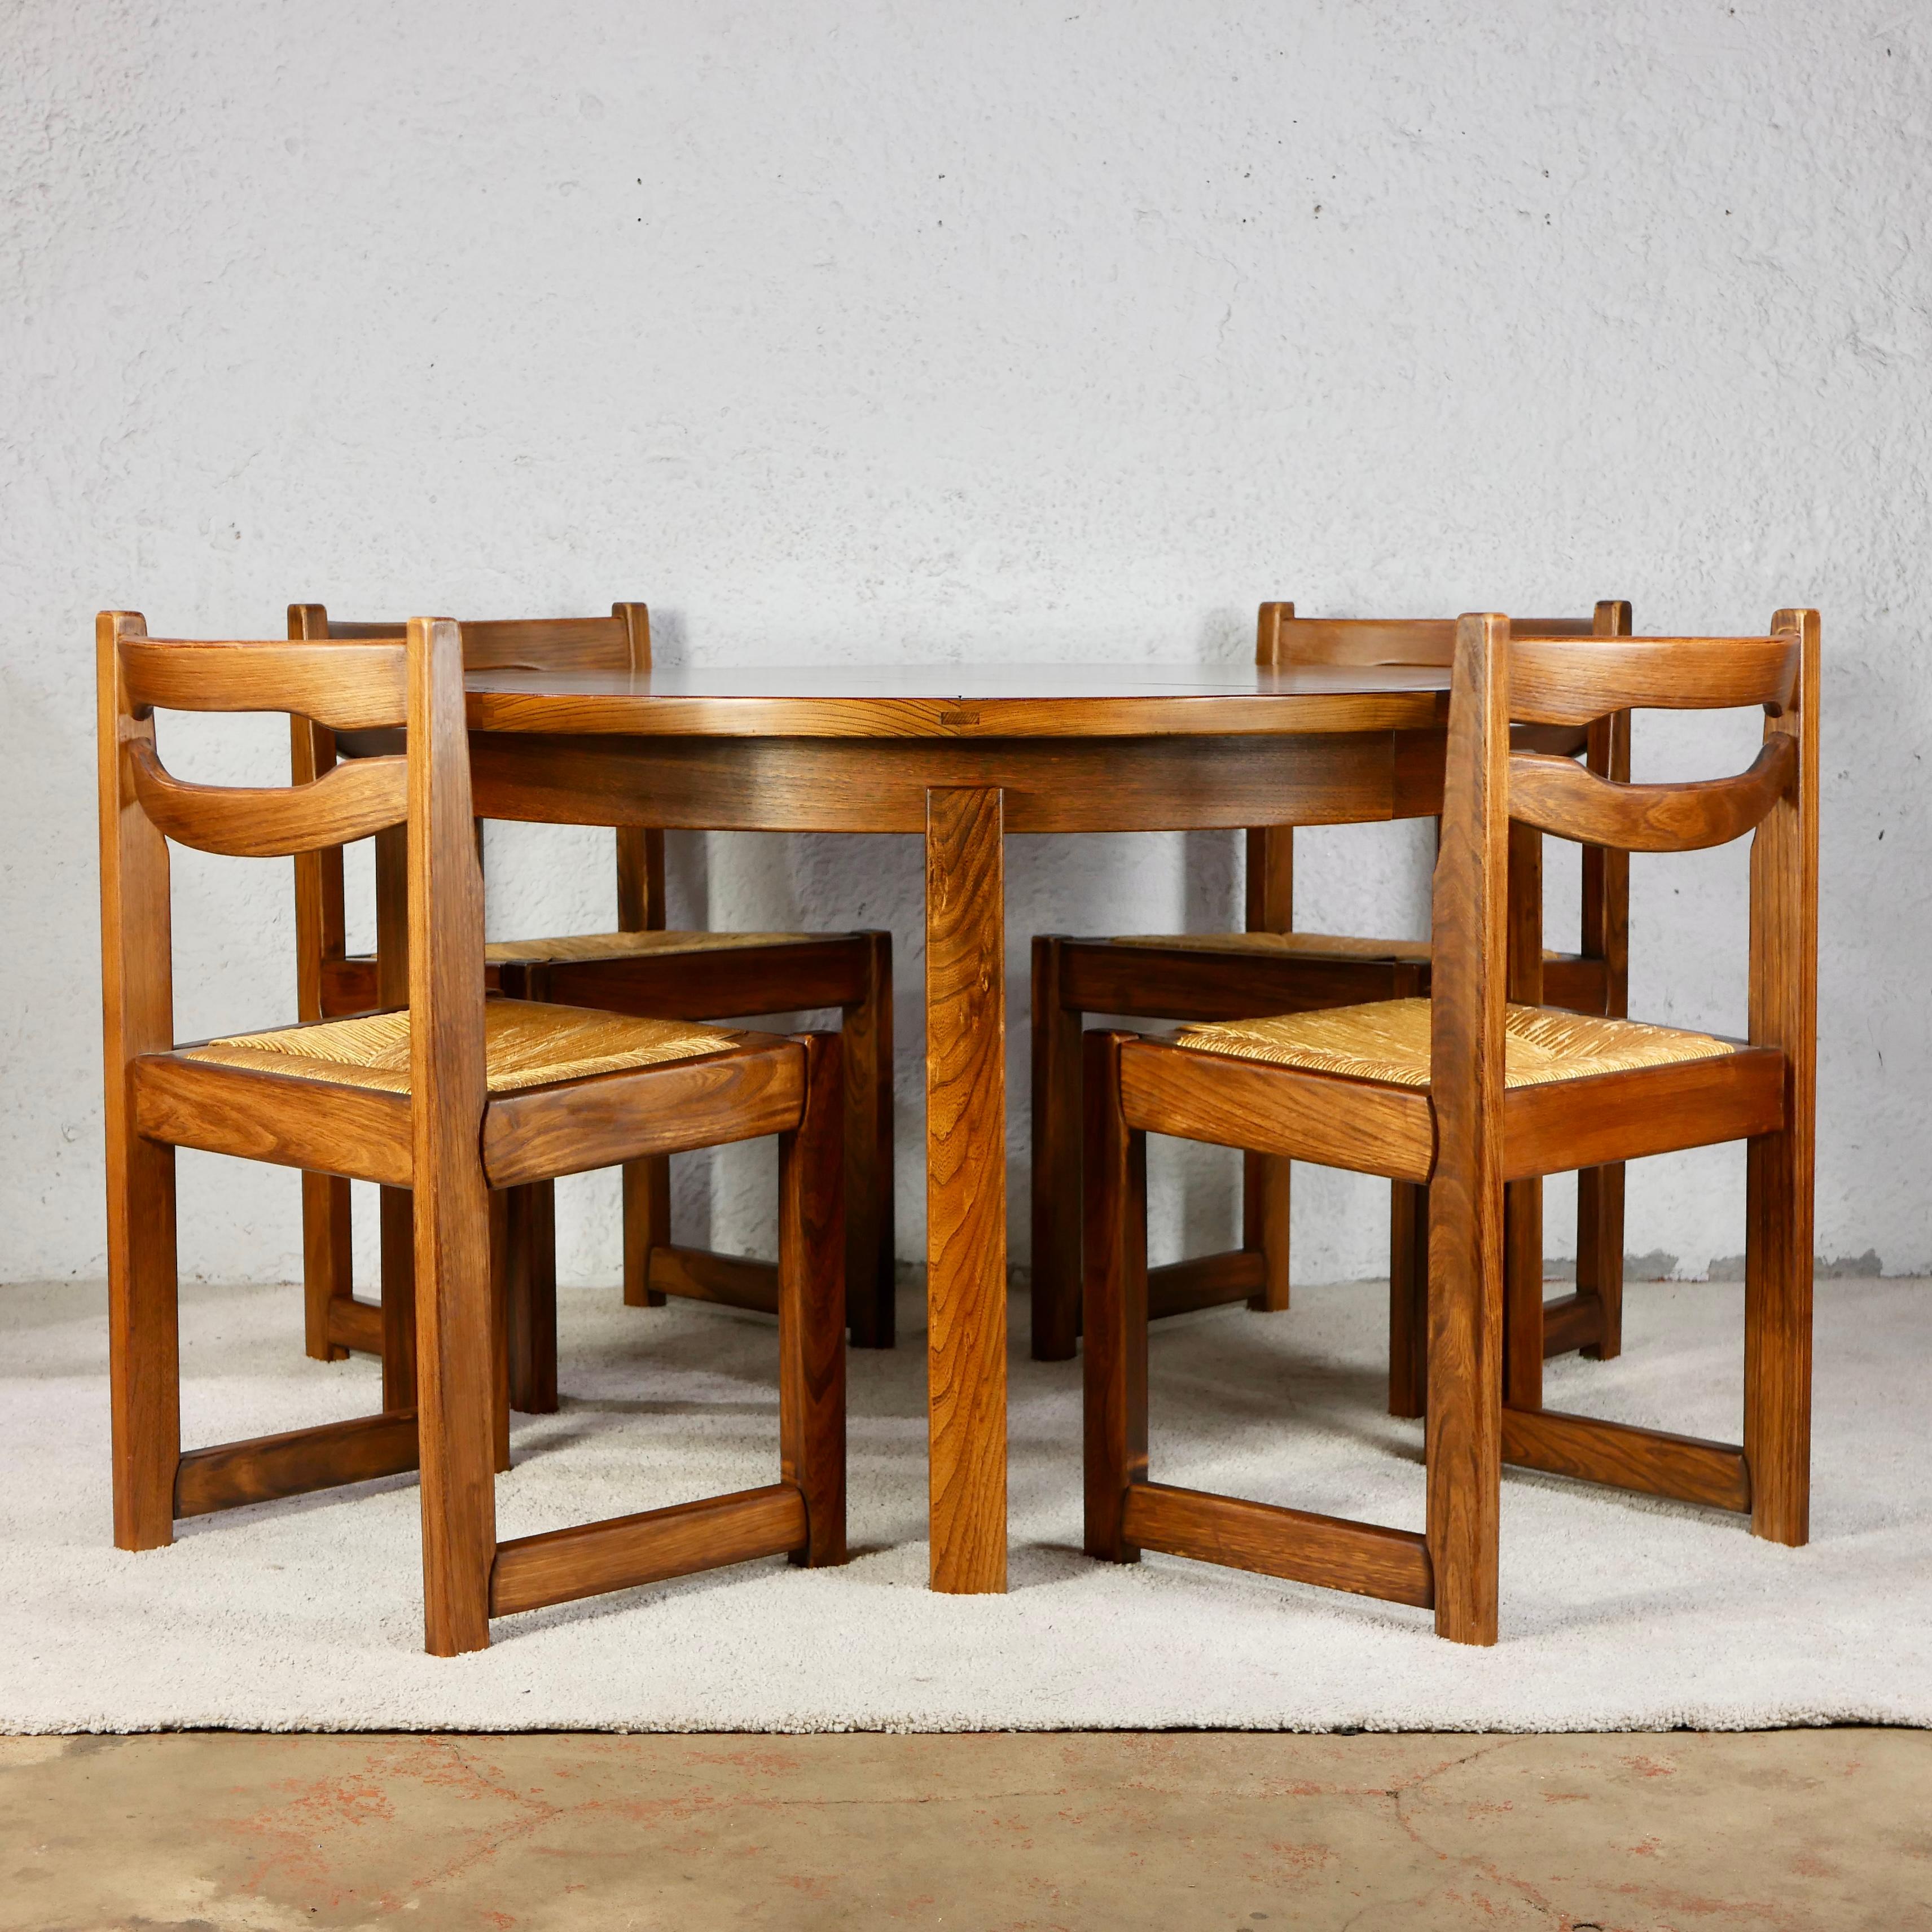 Beautiful dining table set consisting of a solid elm table, with two extensions (for 4 to 8 persons), and 6 solid elm chairs made by Maison Regain in France during the late 1970s.

The table has two extensions, nice wood grain and patina, beautiful